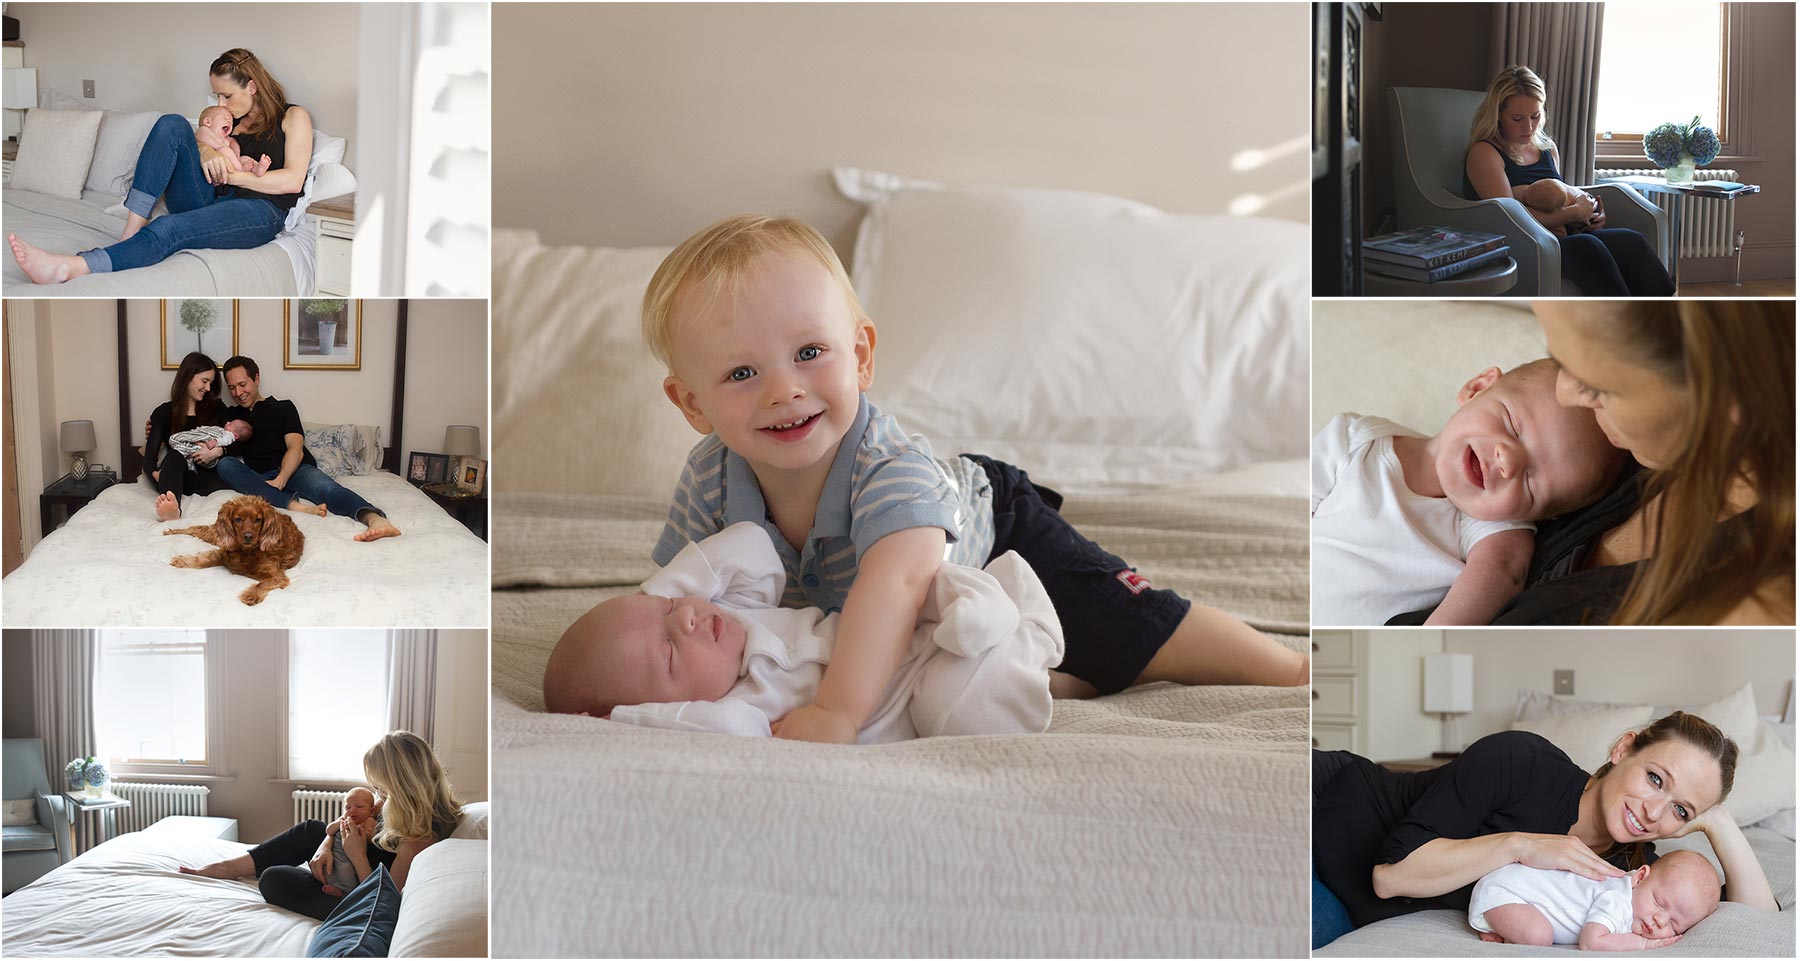 collage of photos taken during a home newborn session: mum on the bed holding baby, mum feeding baby, baby smiling